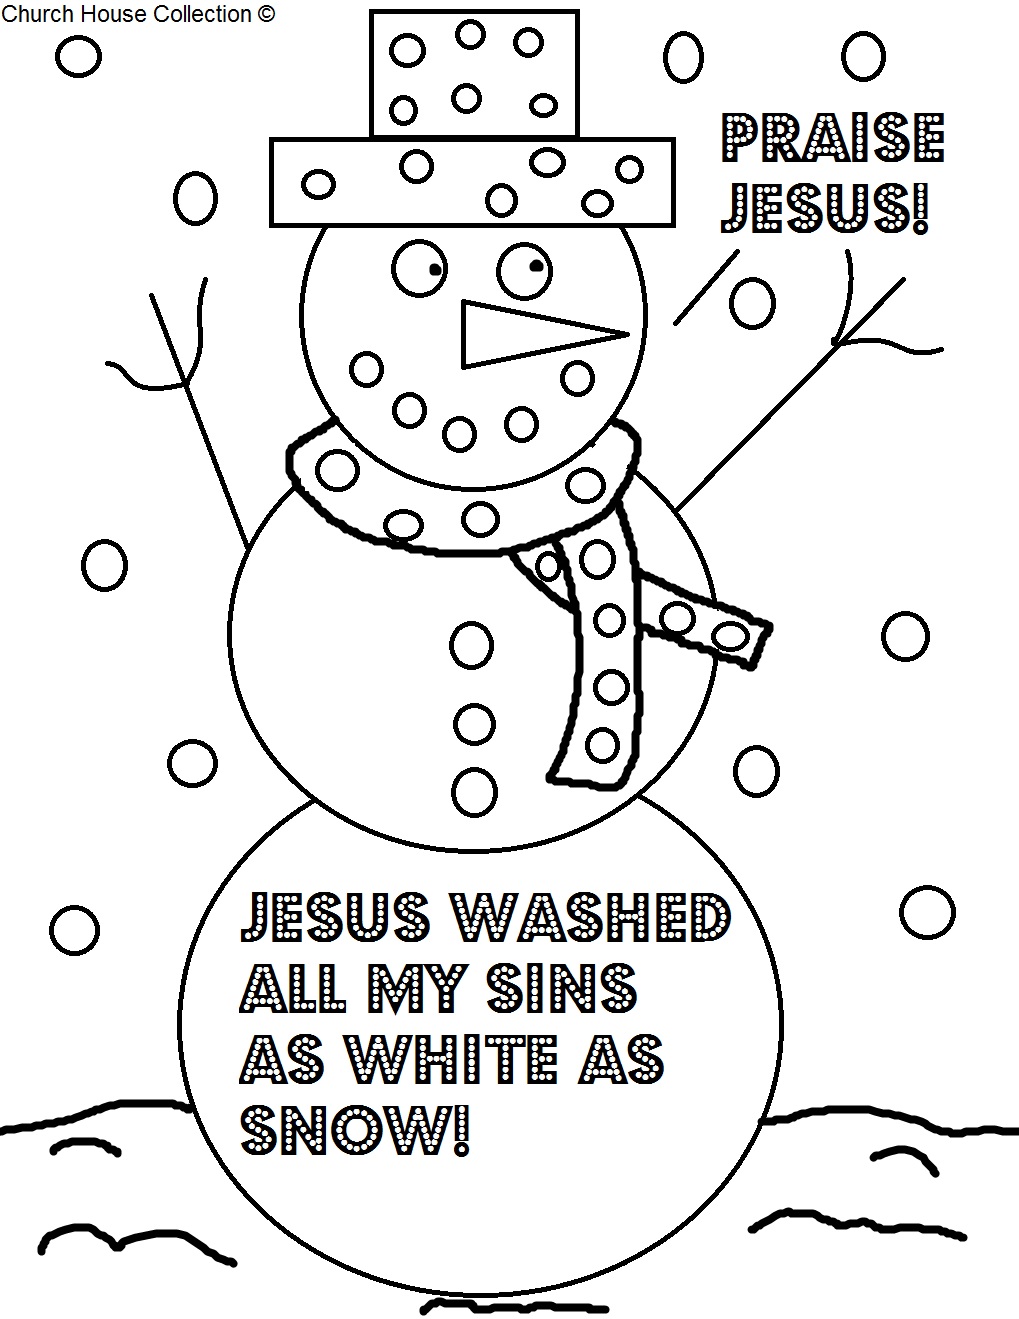 Free Christmas Snowman "Praise Jesus" Coloring Page for Sunday School Kids by Church House